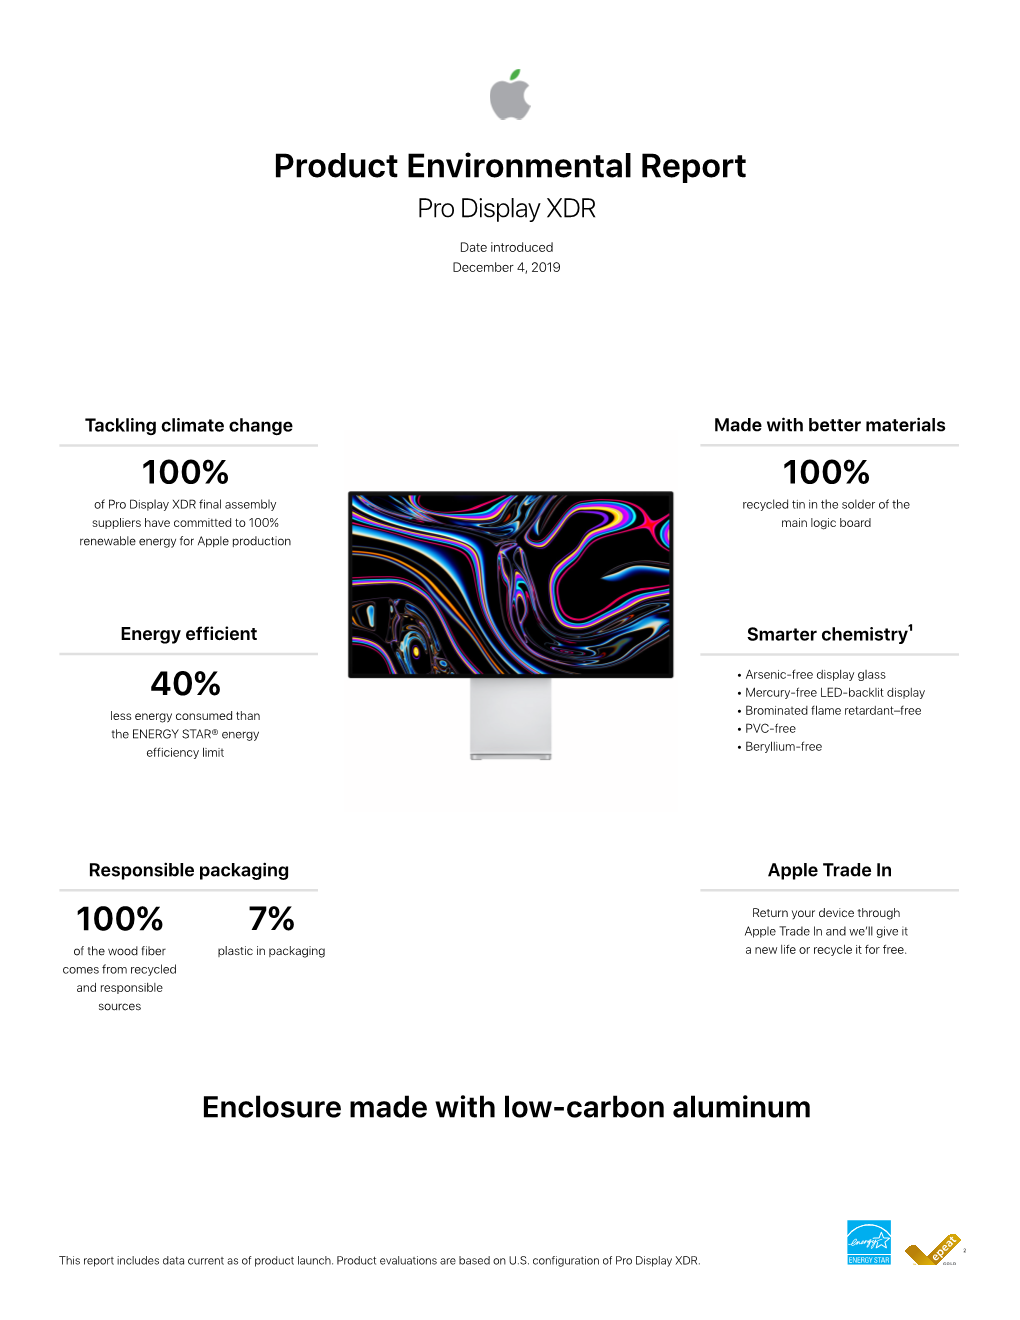 Pro Display XDR Product Environmental Report Source Materials